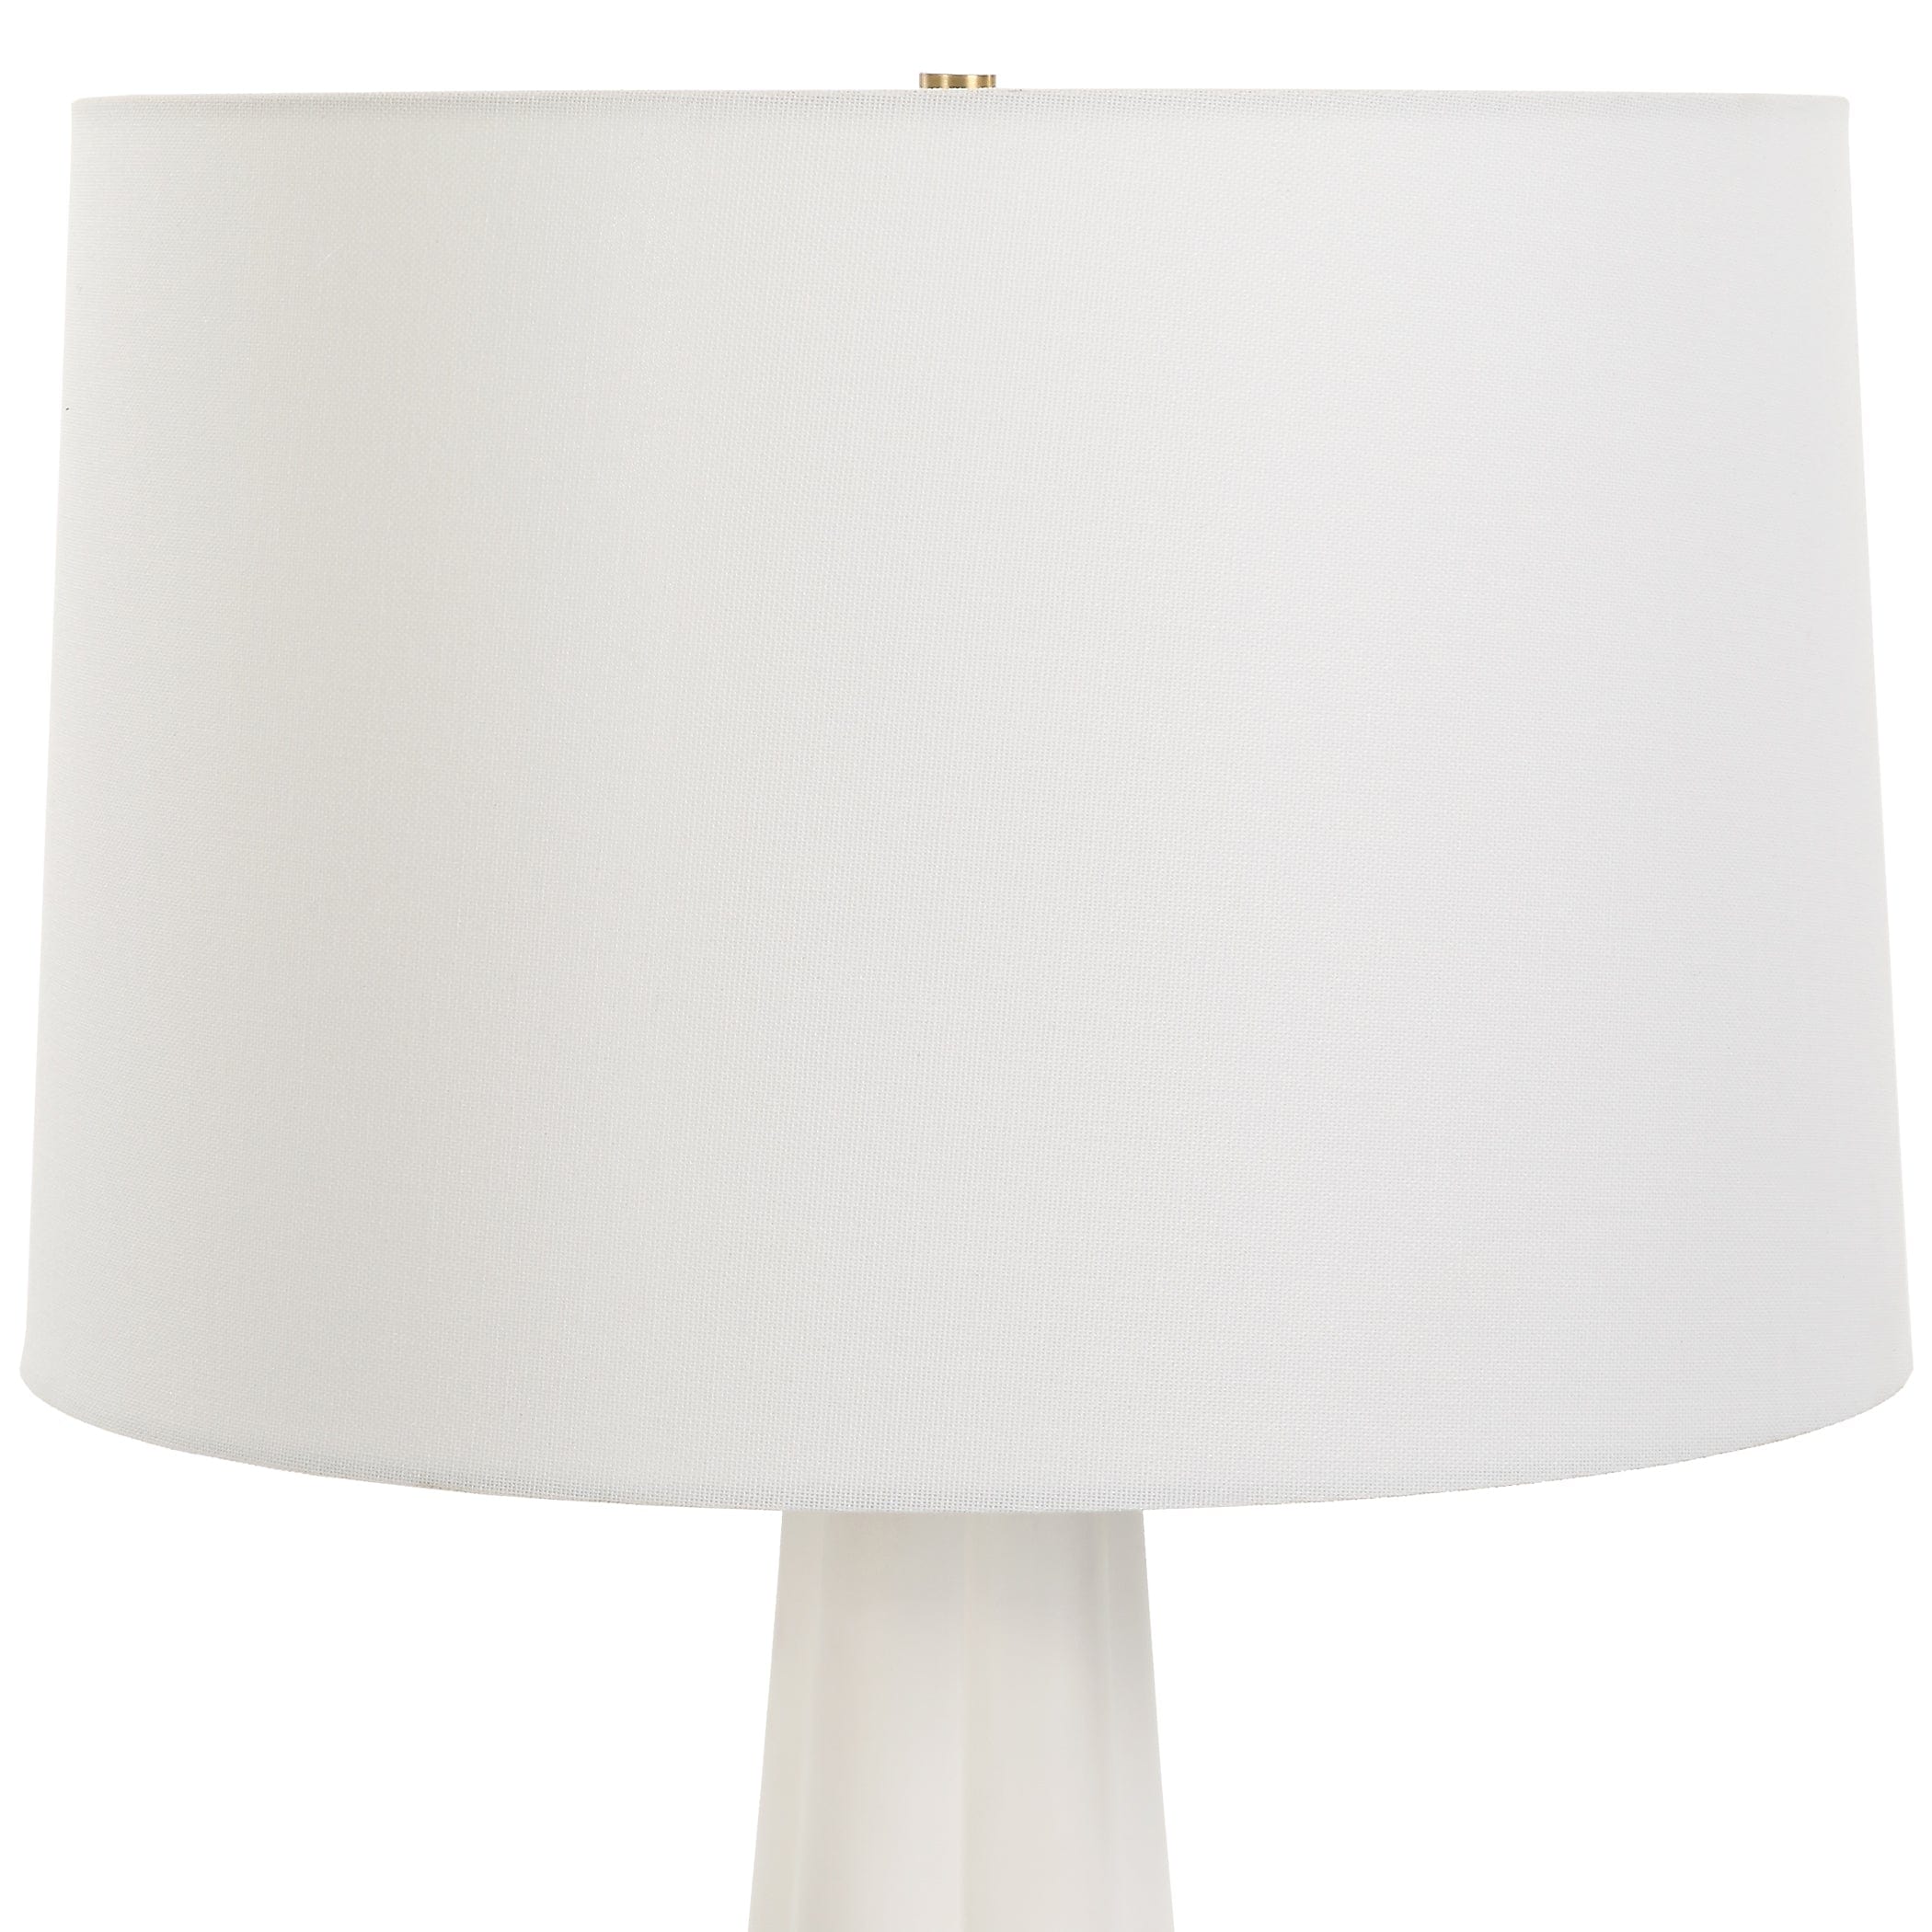 TABLE LAMP-W26134-1 Uttermost